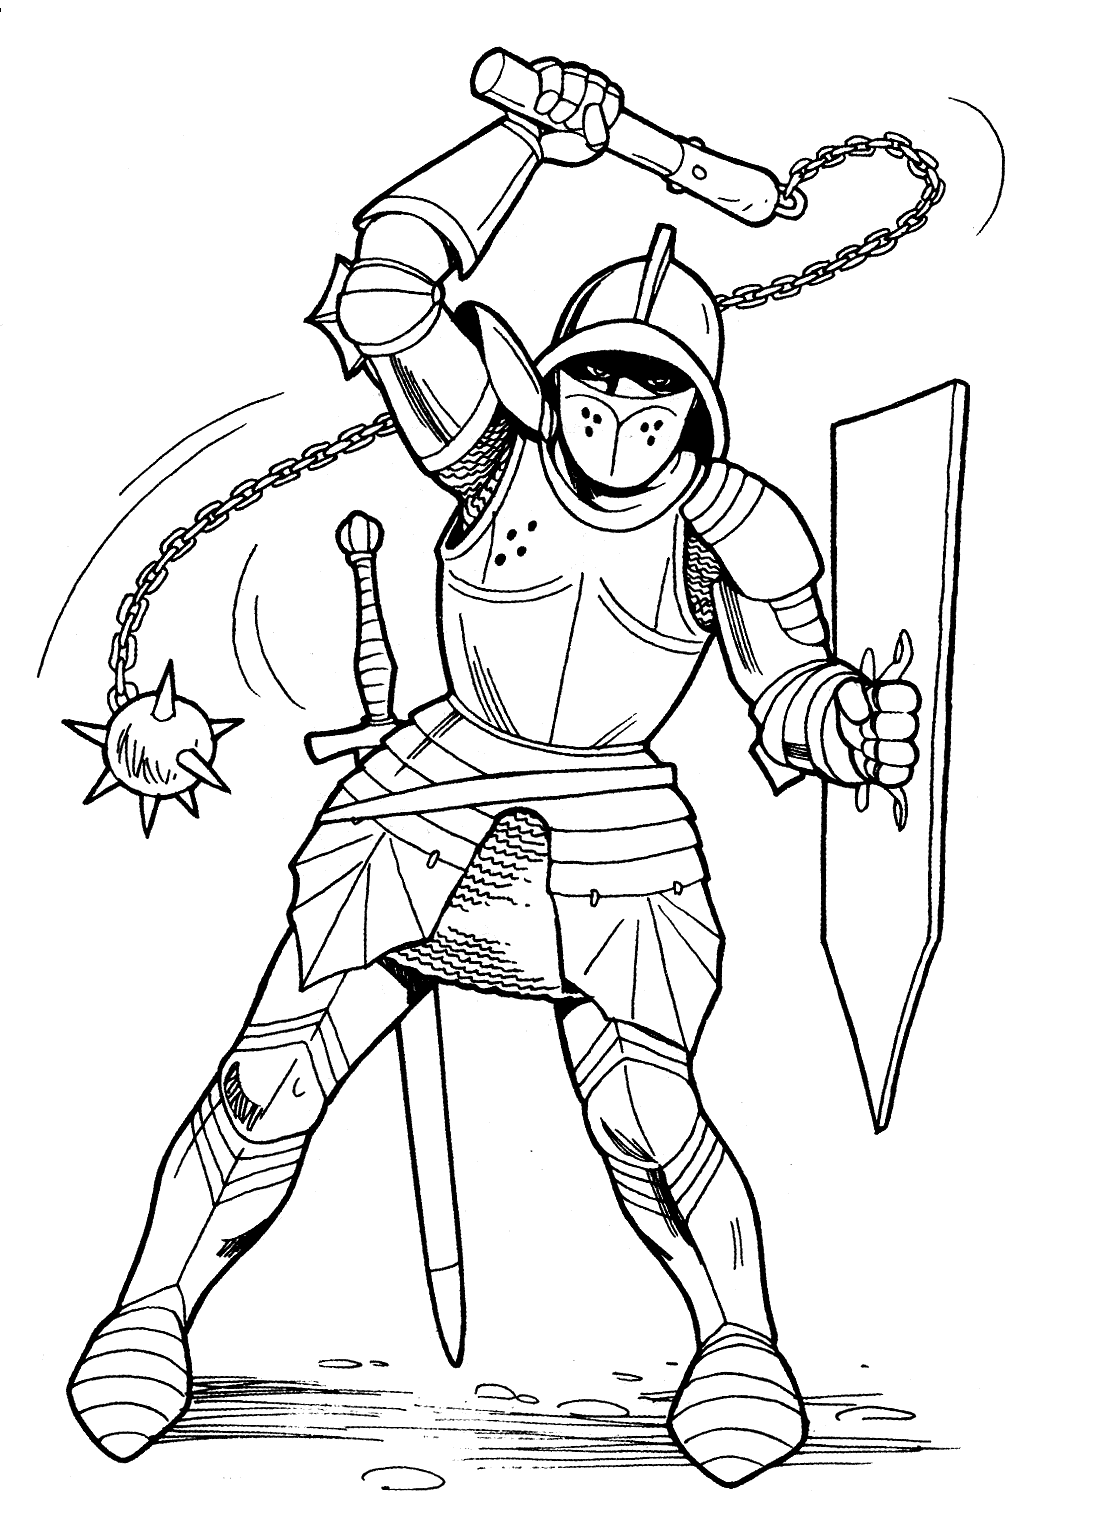 knight coloring page knight horse coloring pages sketch coloring page page coloring knight 